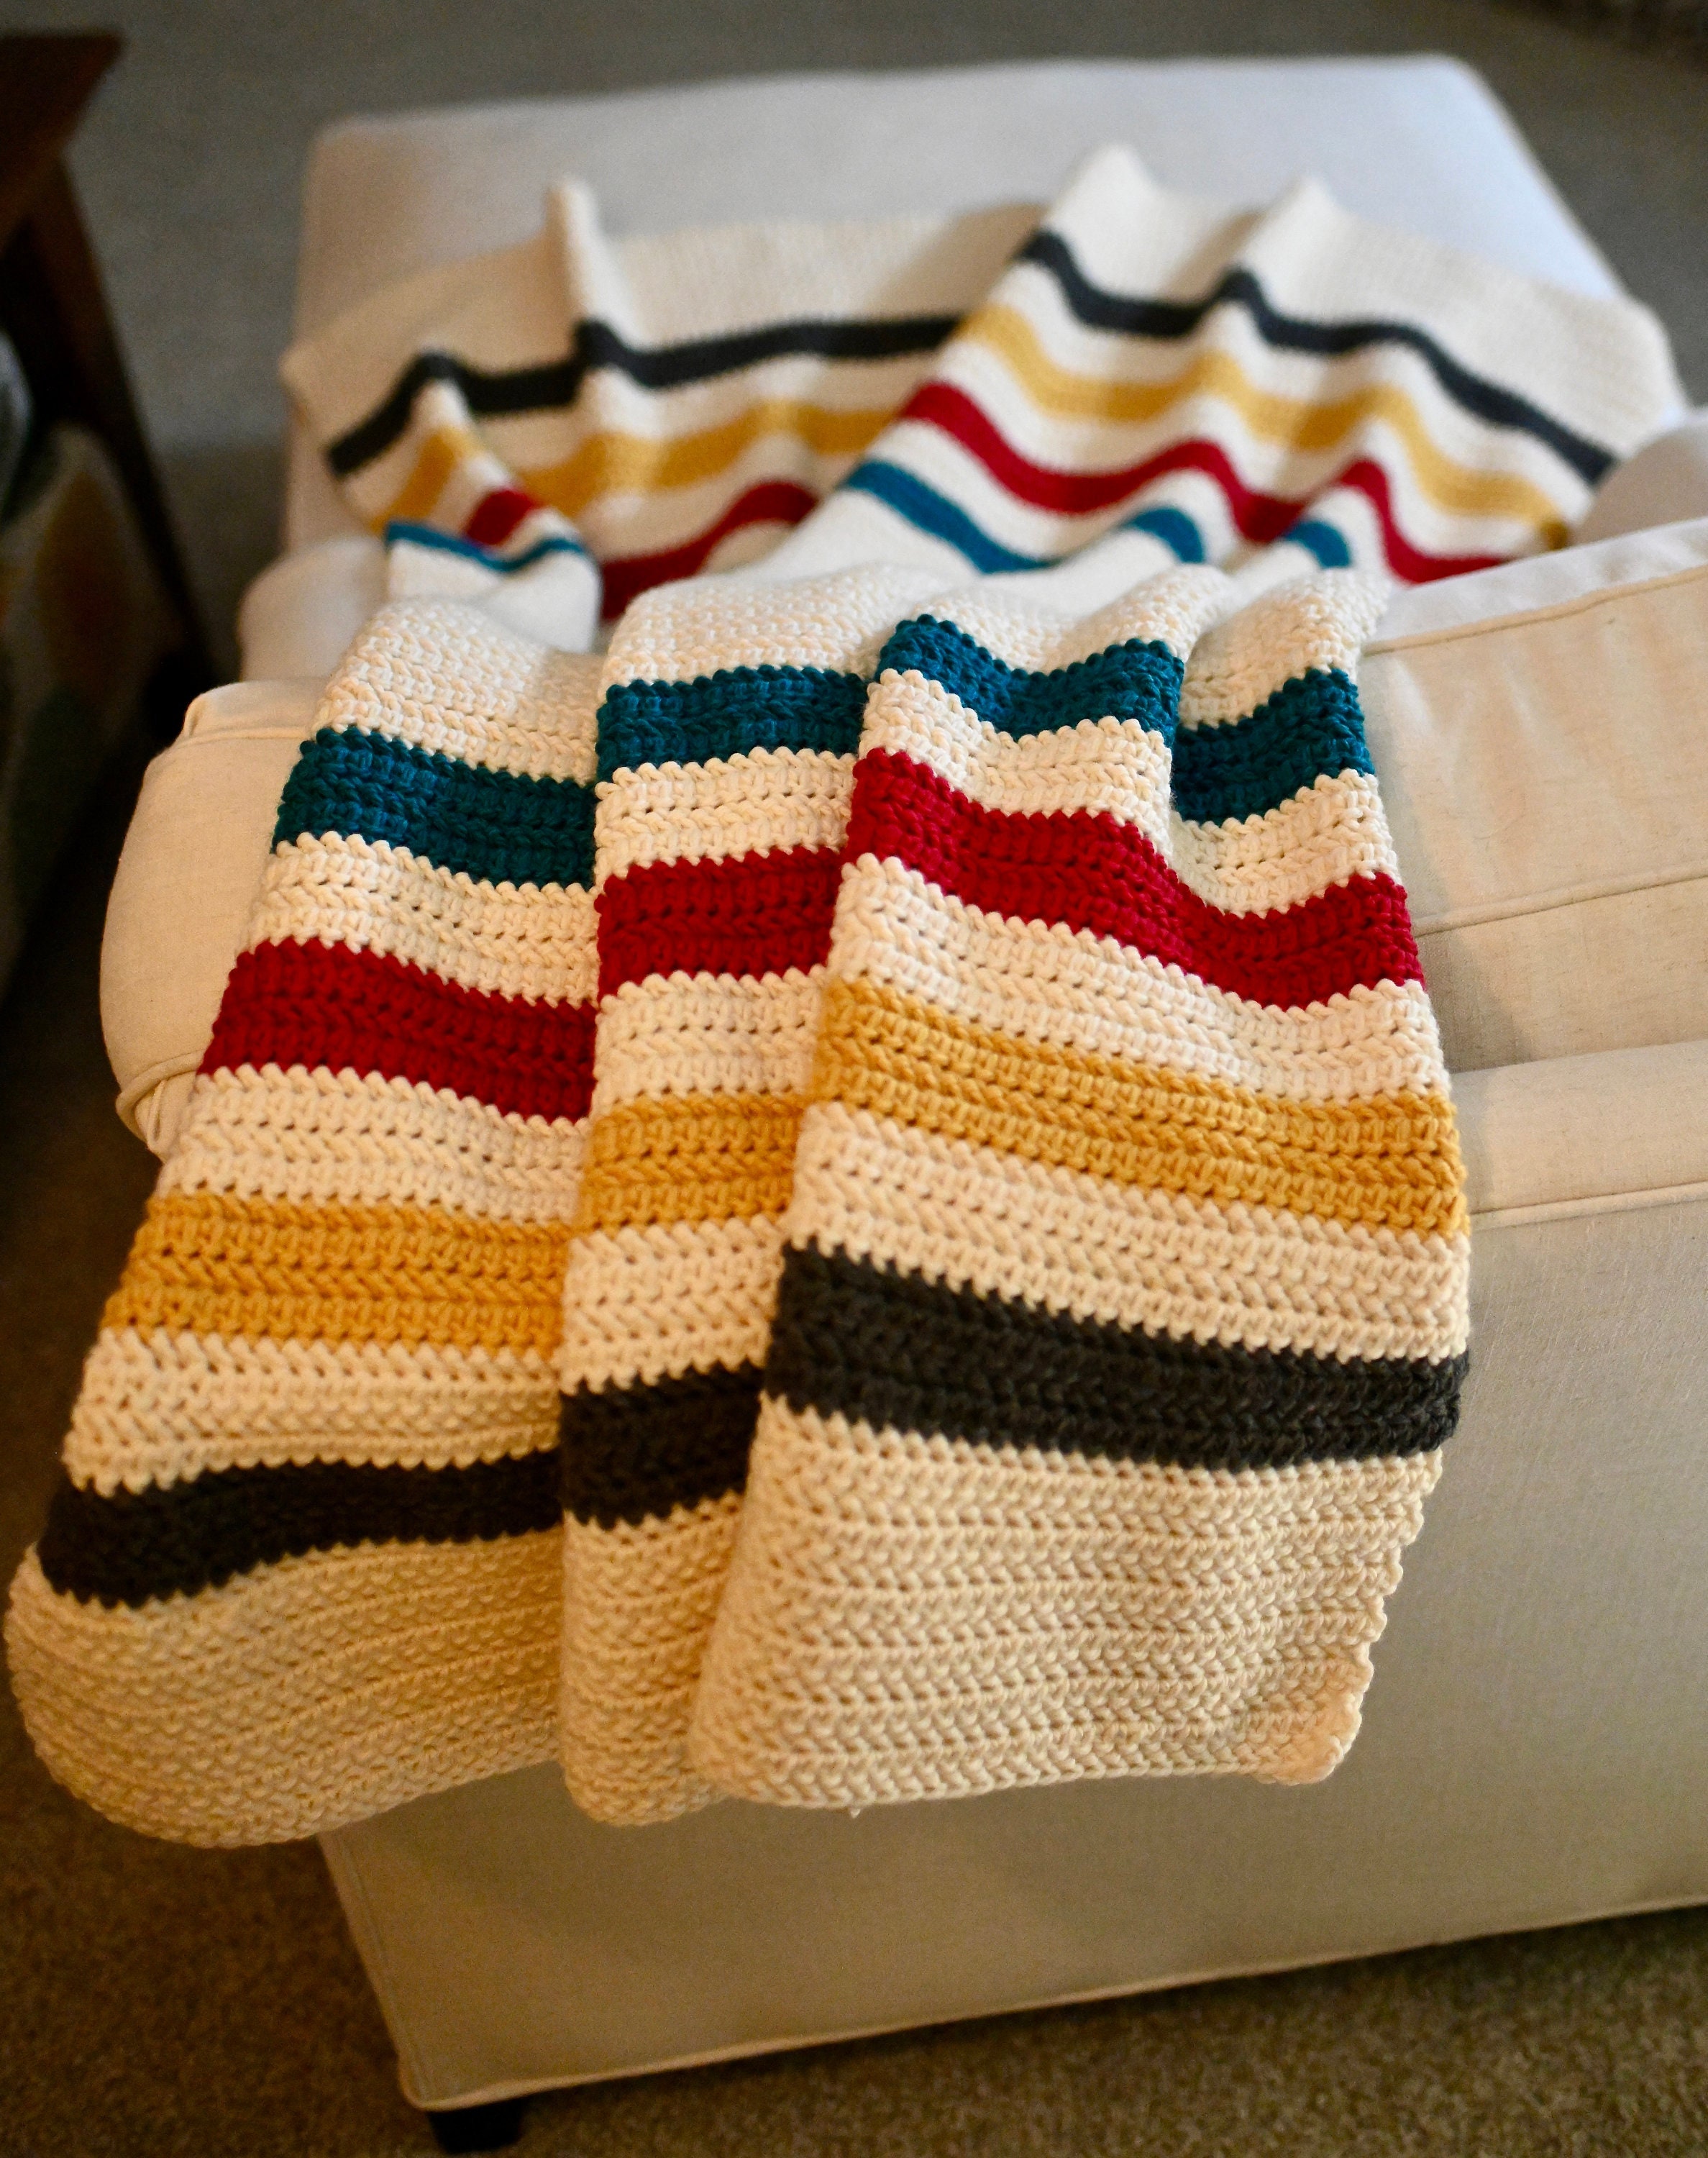 Vintage Baby Blanket CROCHET KIT Everything You Need to Make This Superfine  Peruvian Alpaca Wrap Collaboration DIY Kit With Sweetpeafamily 